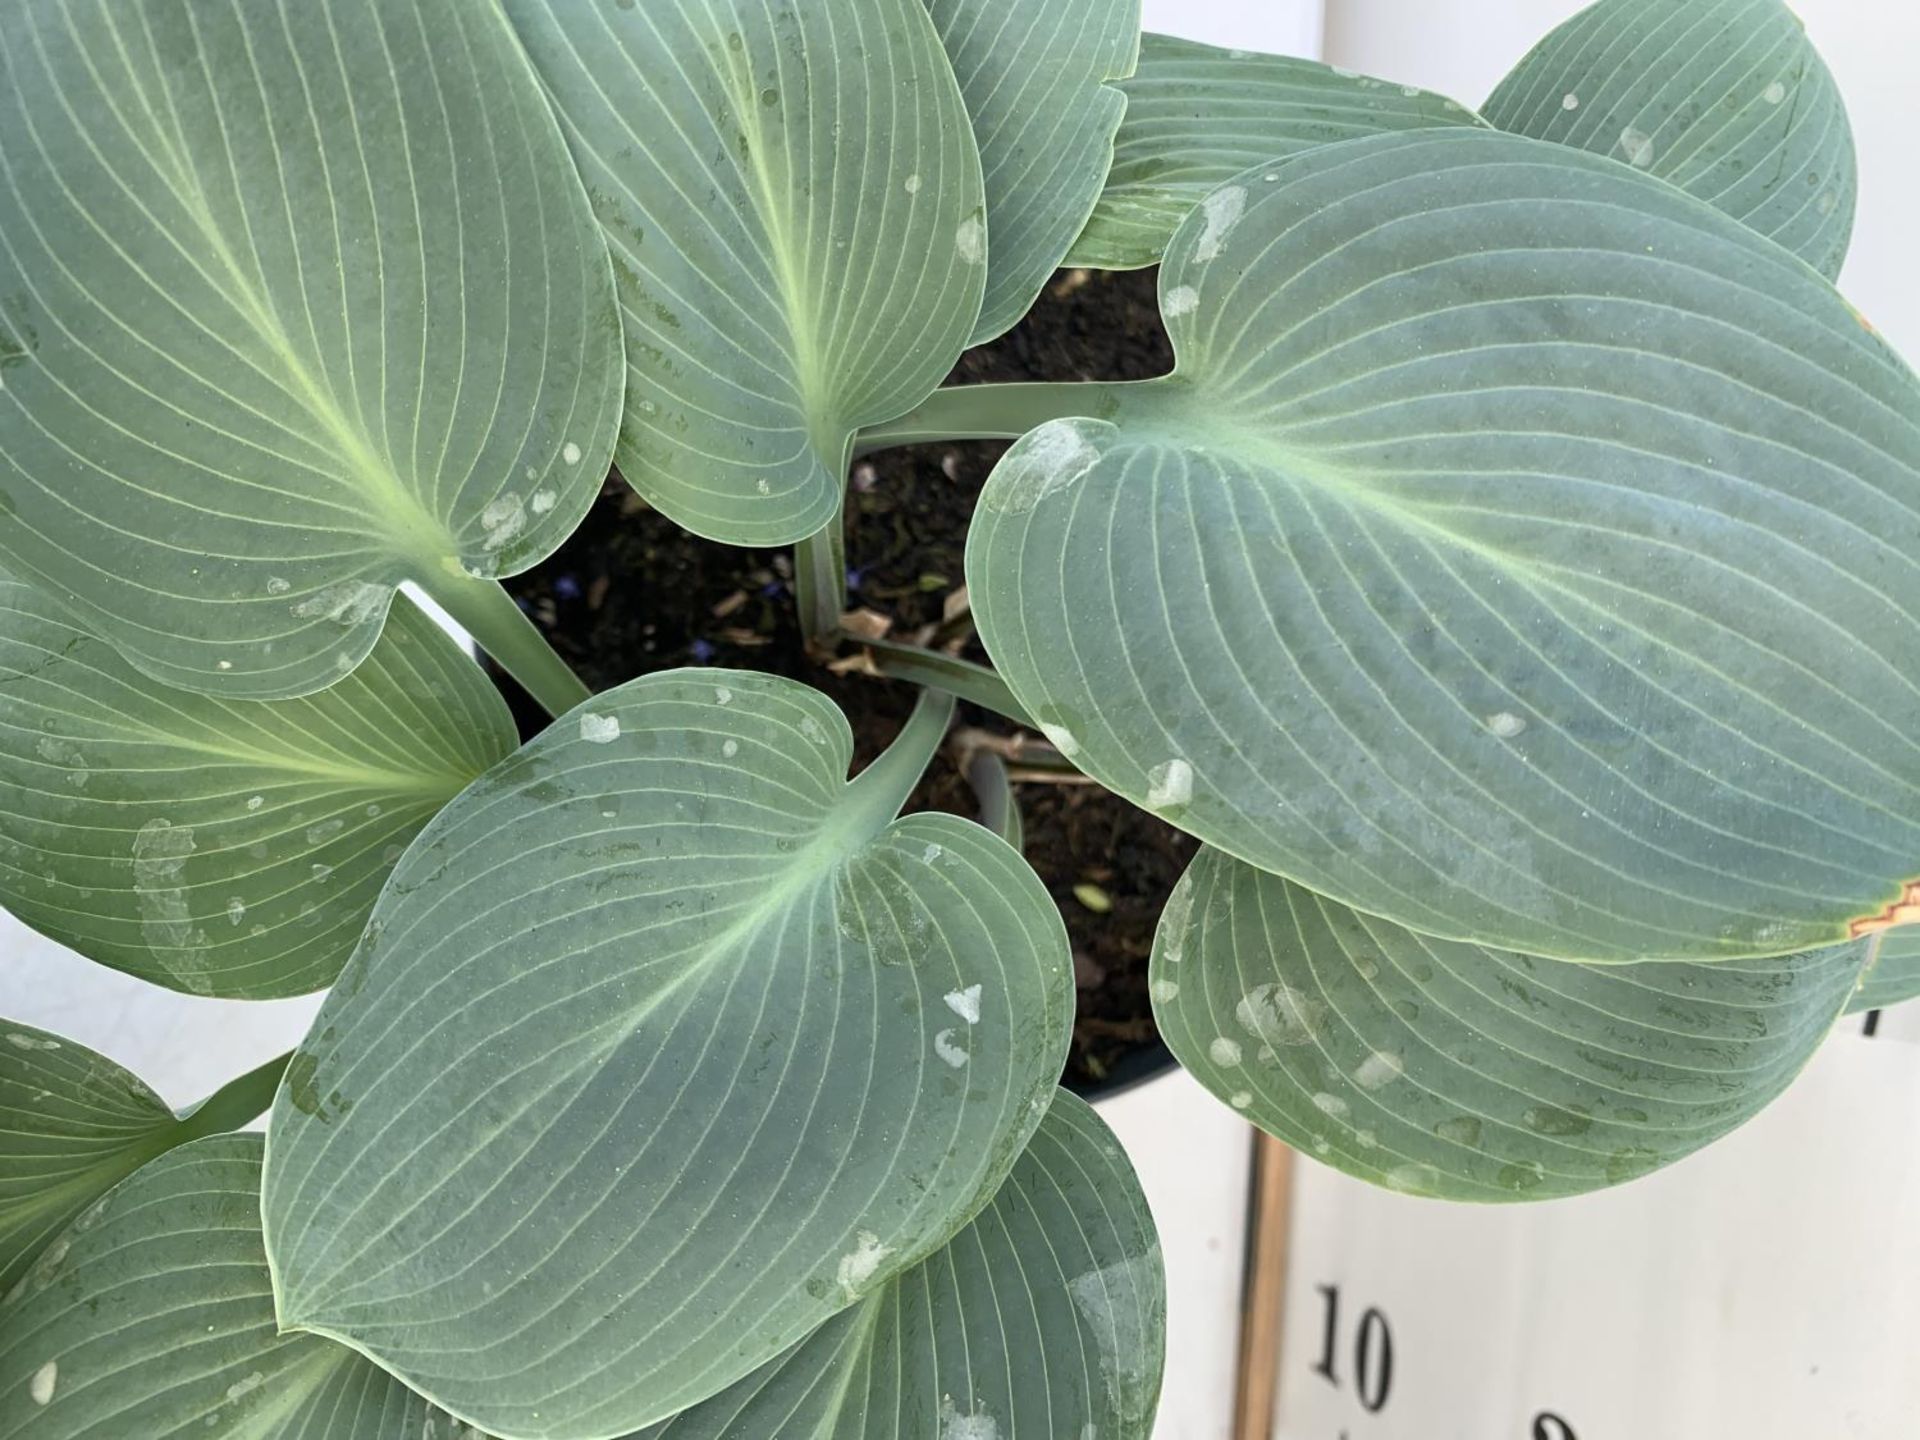 THREE MIXED VARIETY HOSTAS TO INCLUDE WIDE BRIM, HALCYON AND PATRIOT IN 3 LTR POTS 30CM TALL TO BE - Image 8 of 16